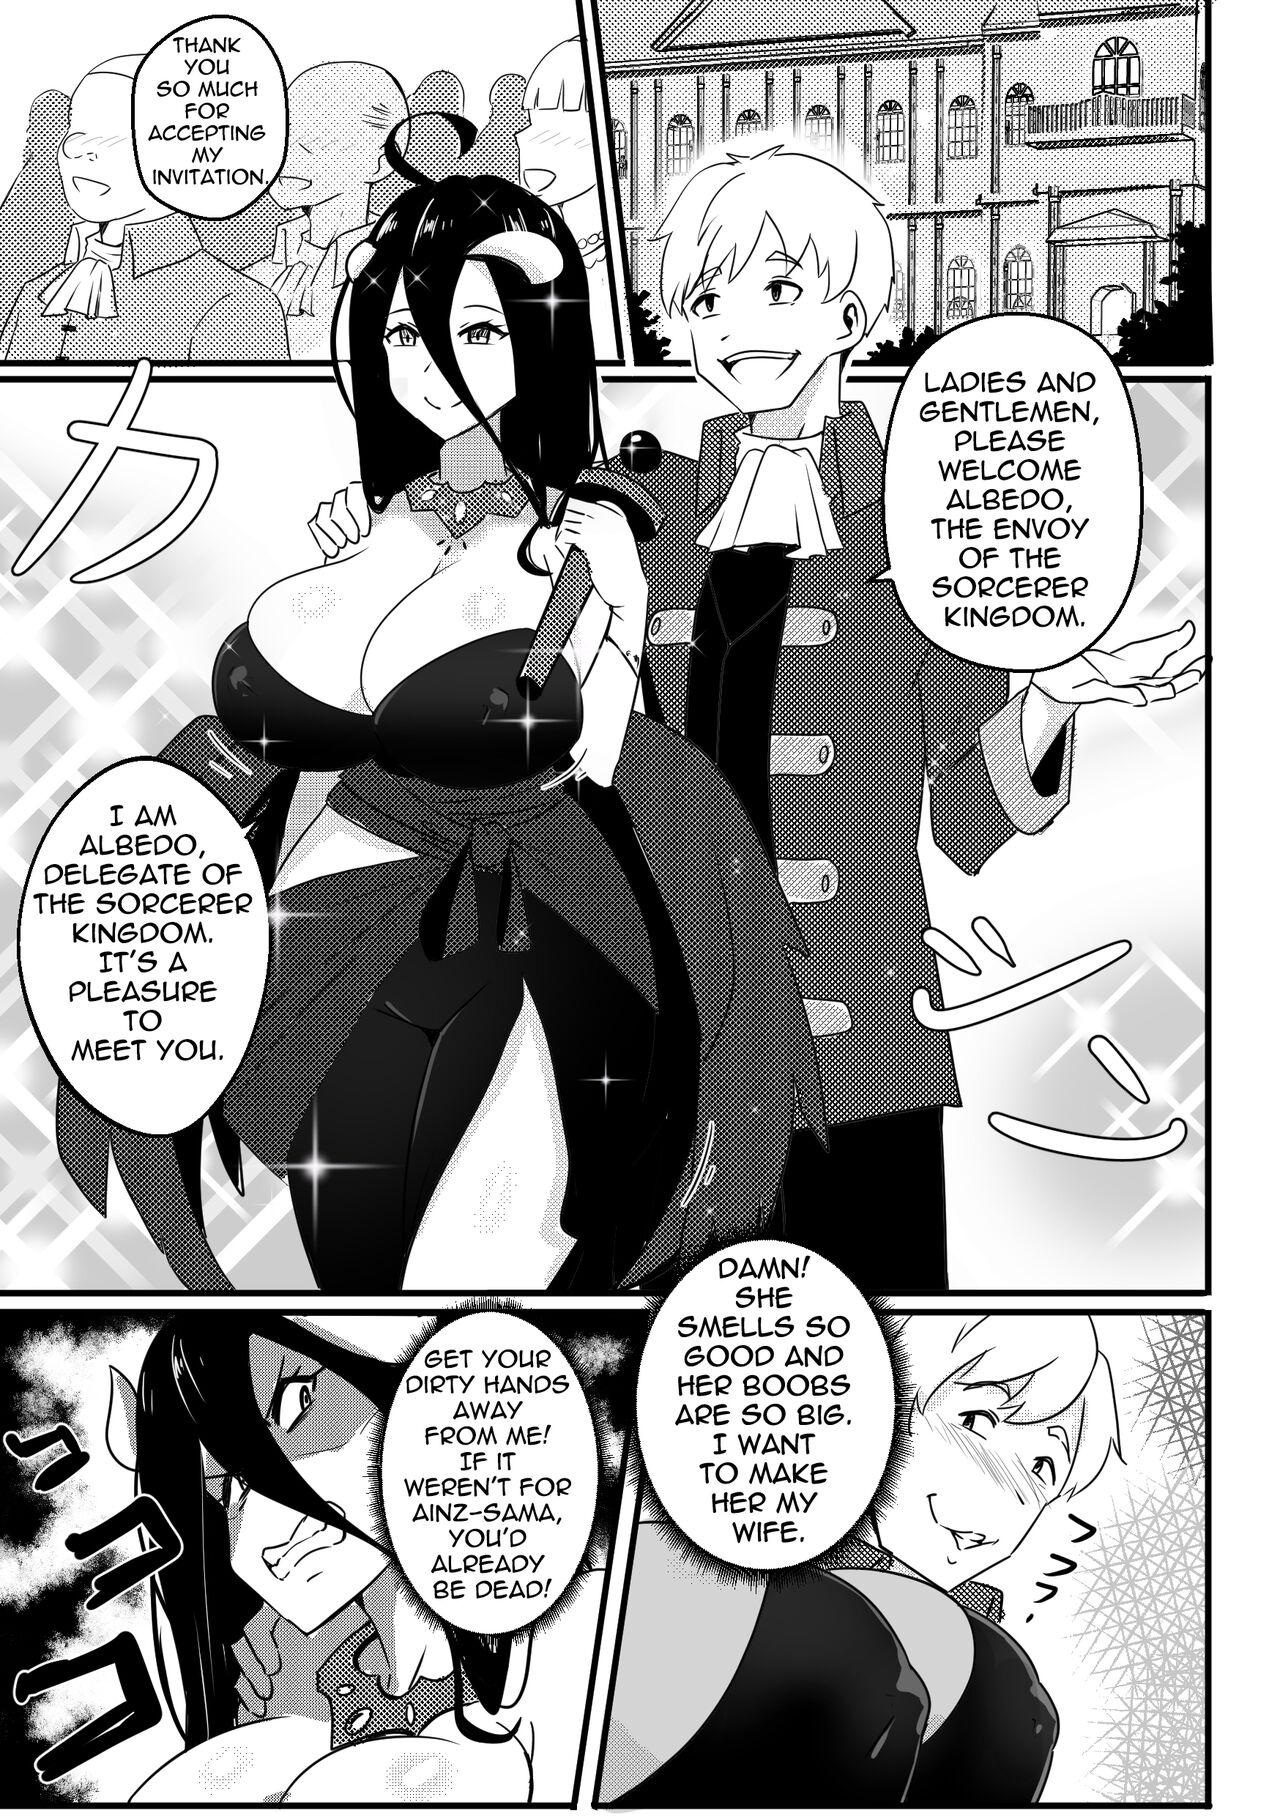 Trannies [Merkonig] B-Trayal 40 Albedo (Overlord) Censored [English] - Overlord China - Picture 2